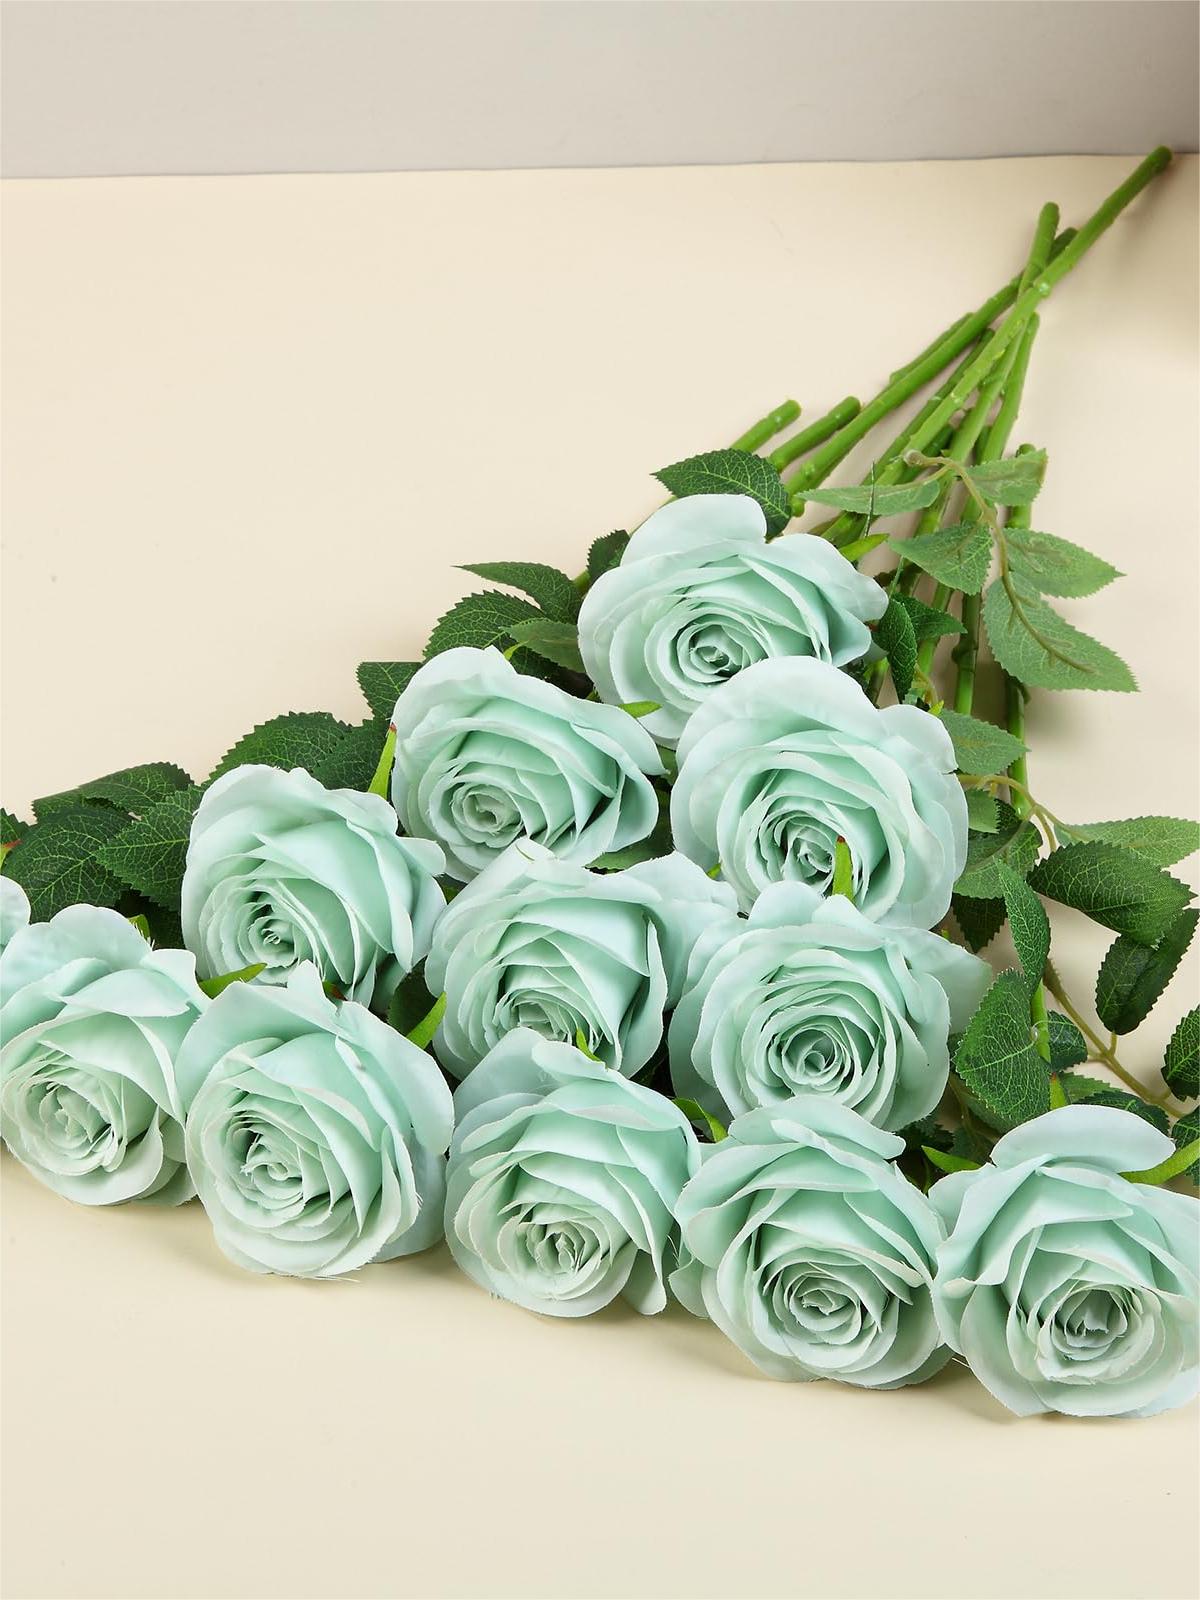 Mint Green Artificial Rose Flowers With Long Stems Wedding Bouquet Centerpieces Decorations HH8049